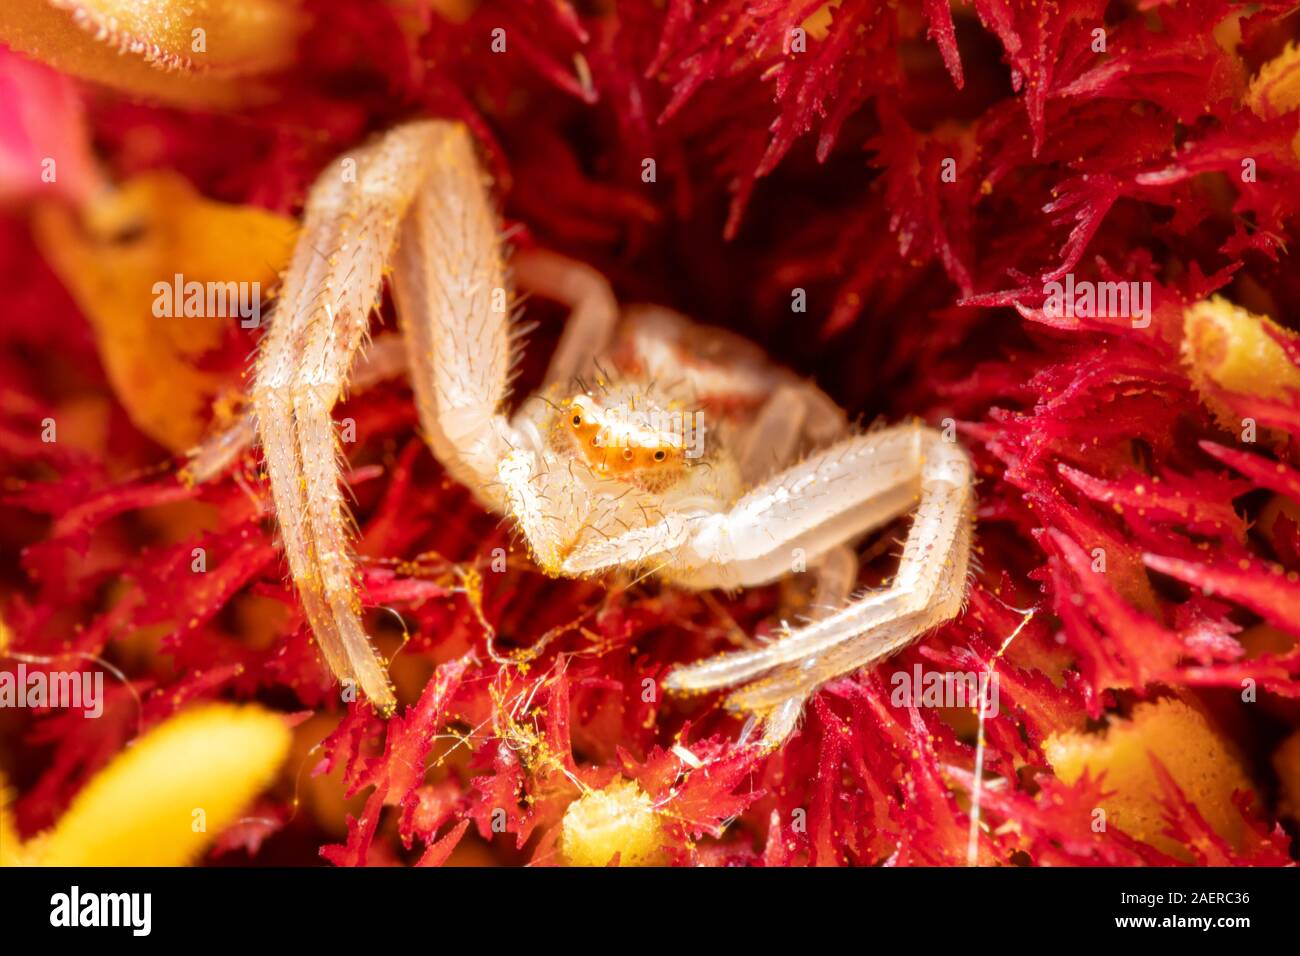 Mecaphesa spp. Crab spider hiding in the center of a Zinnia flower, waiting for prey Stock Photo